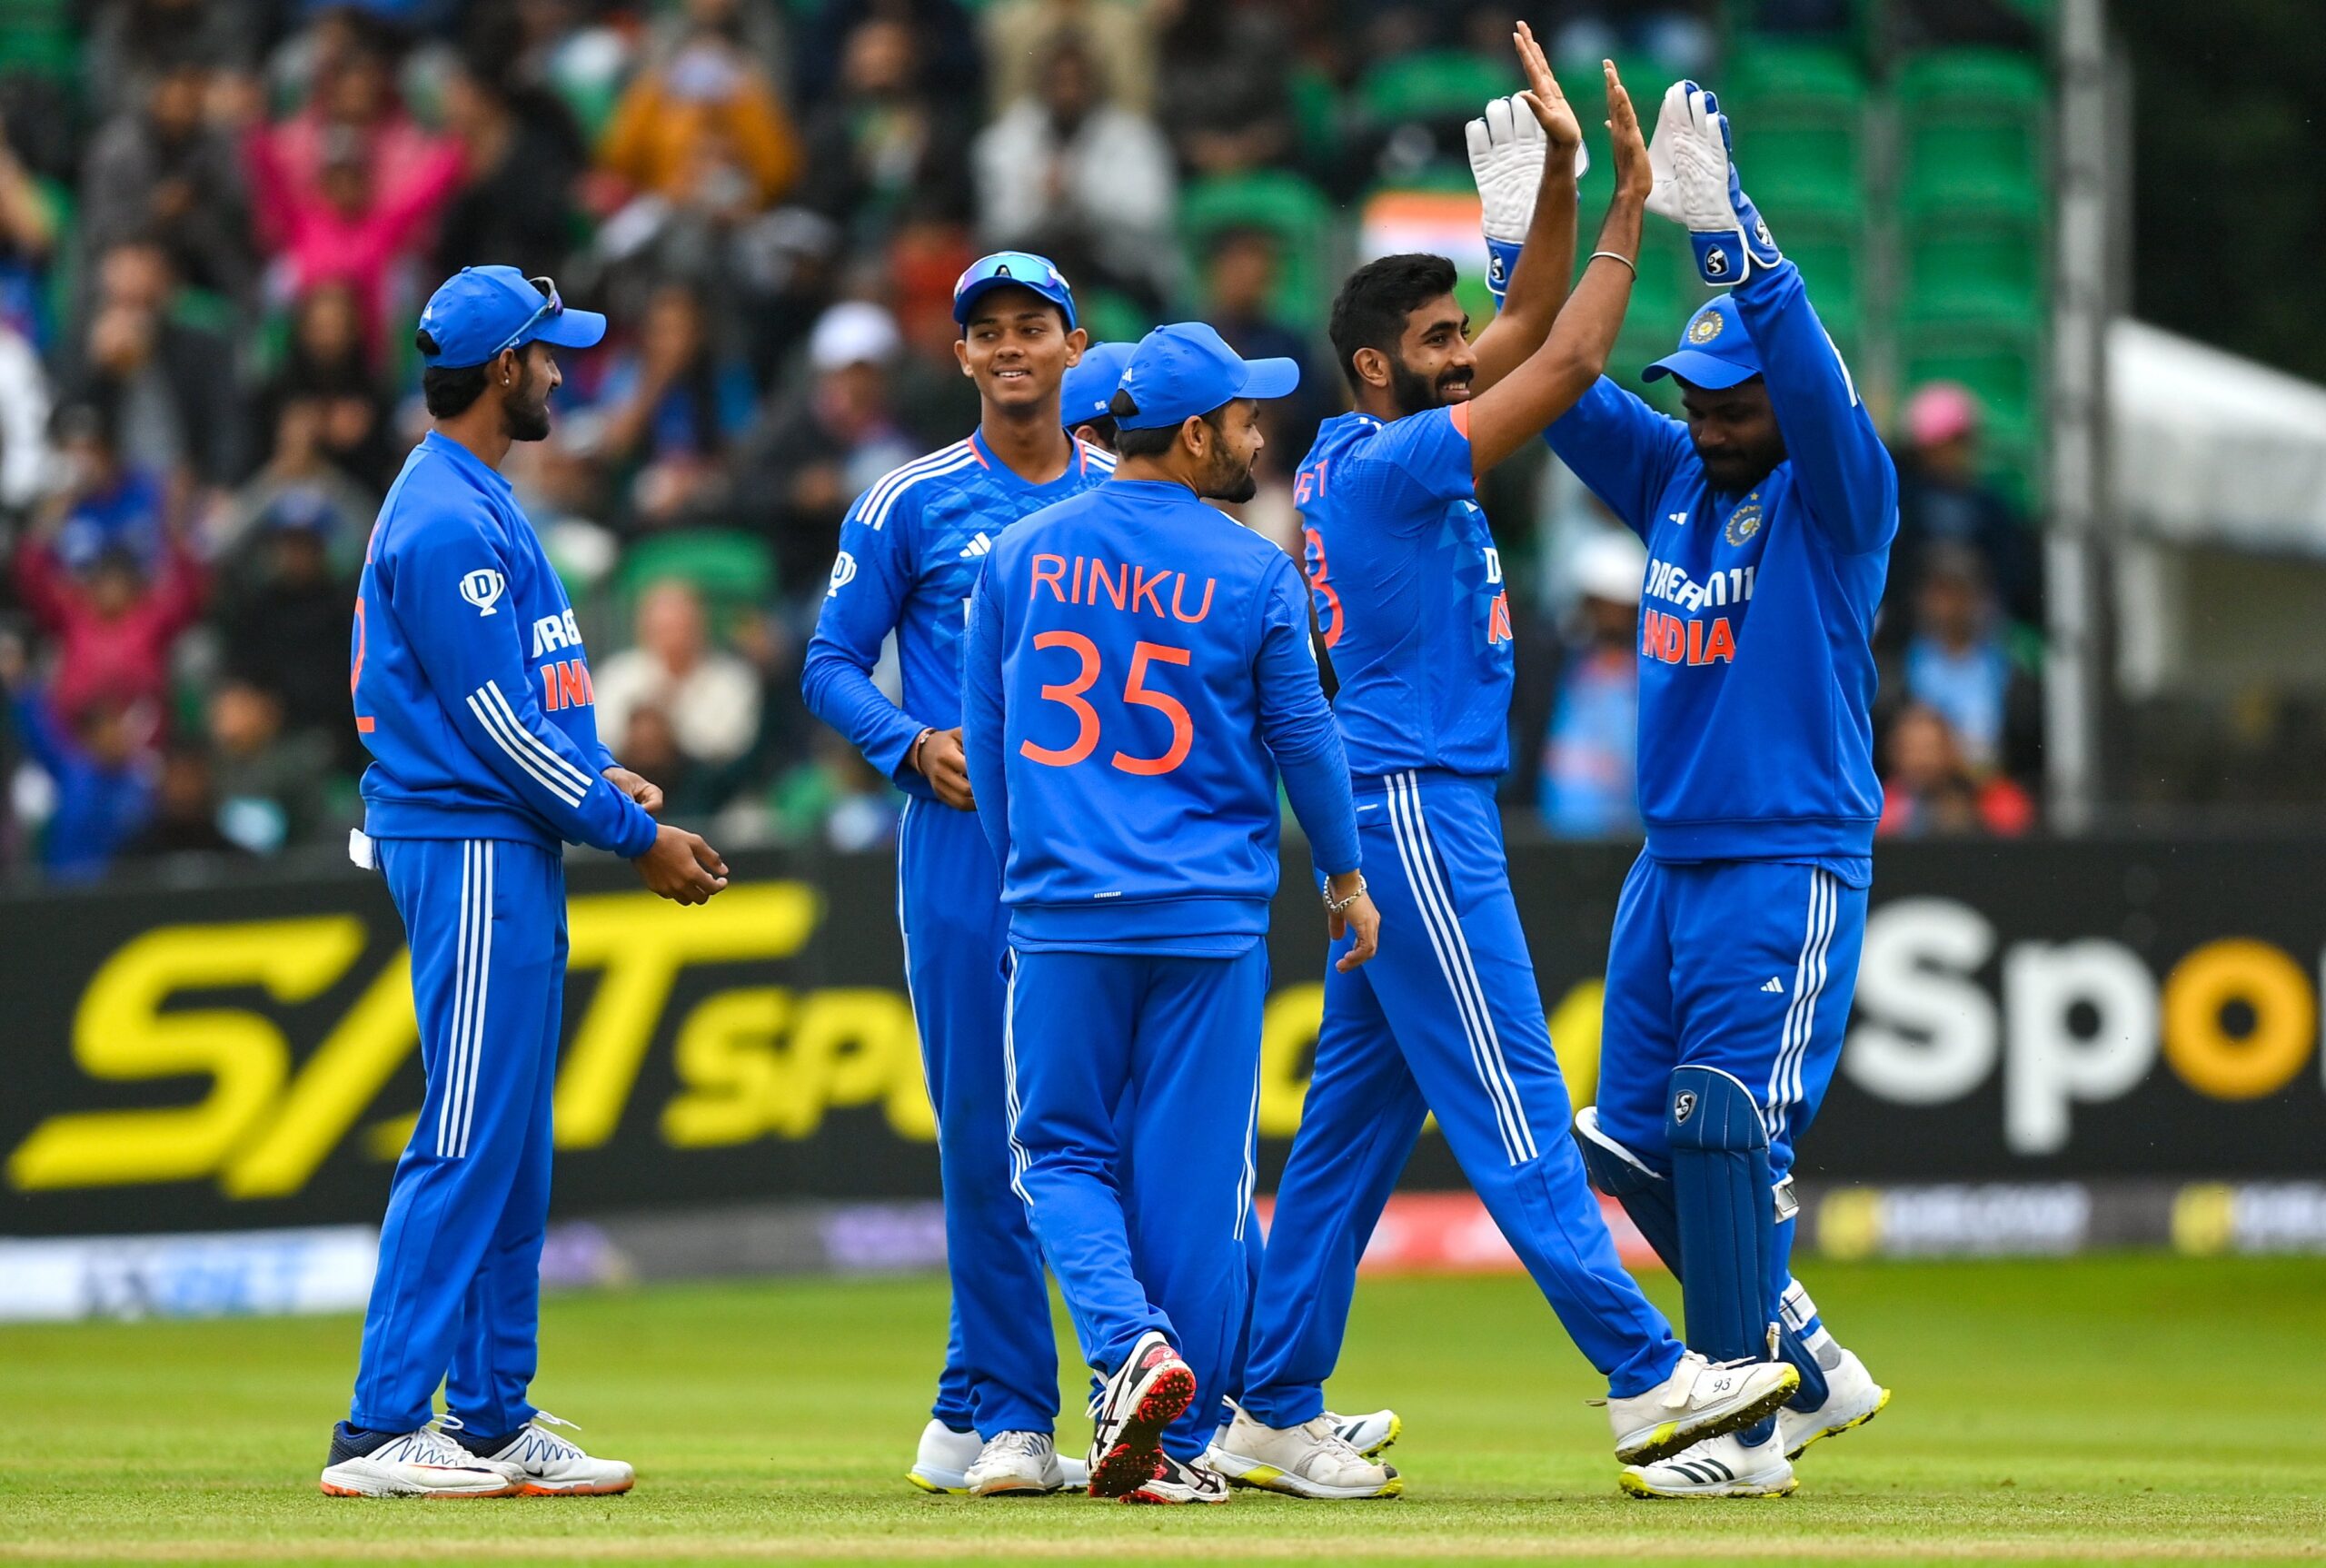 Indian Cricket Team | IND vs IRE | Image: Getty Images